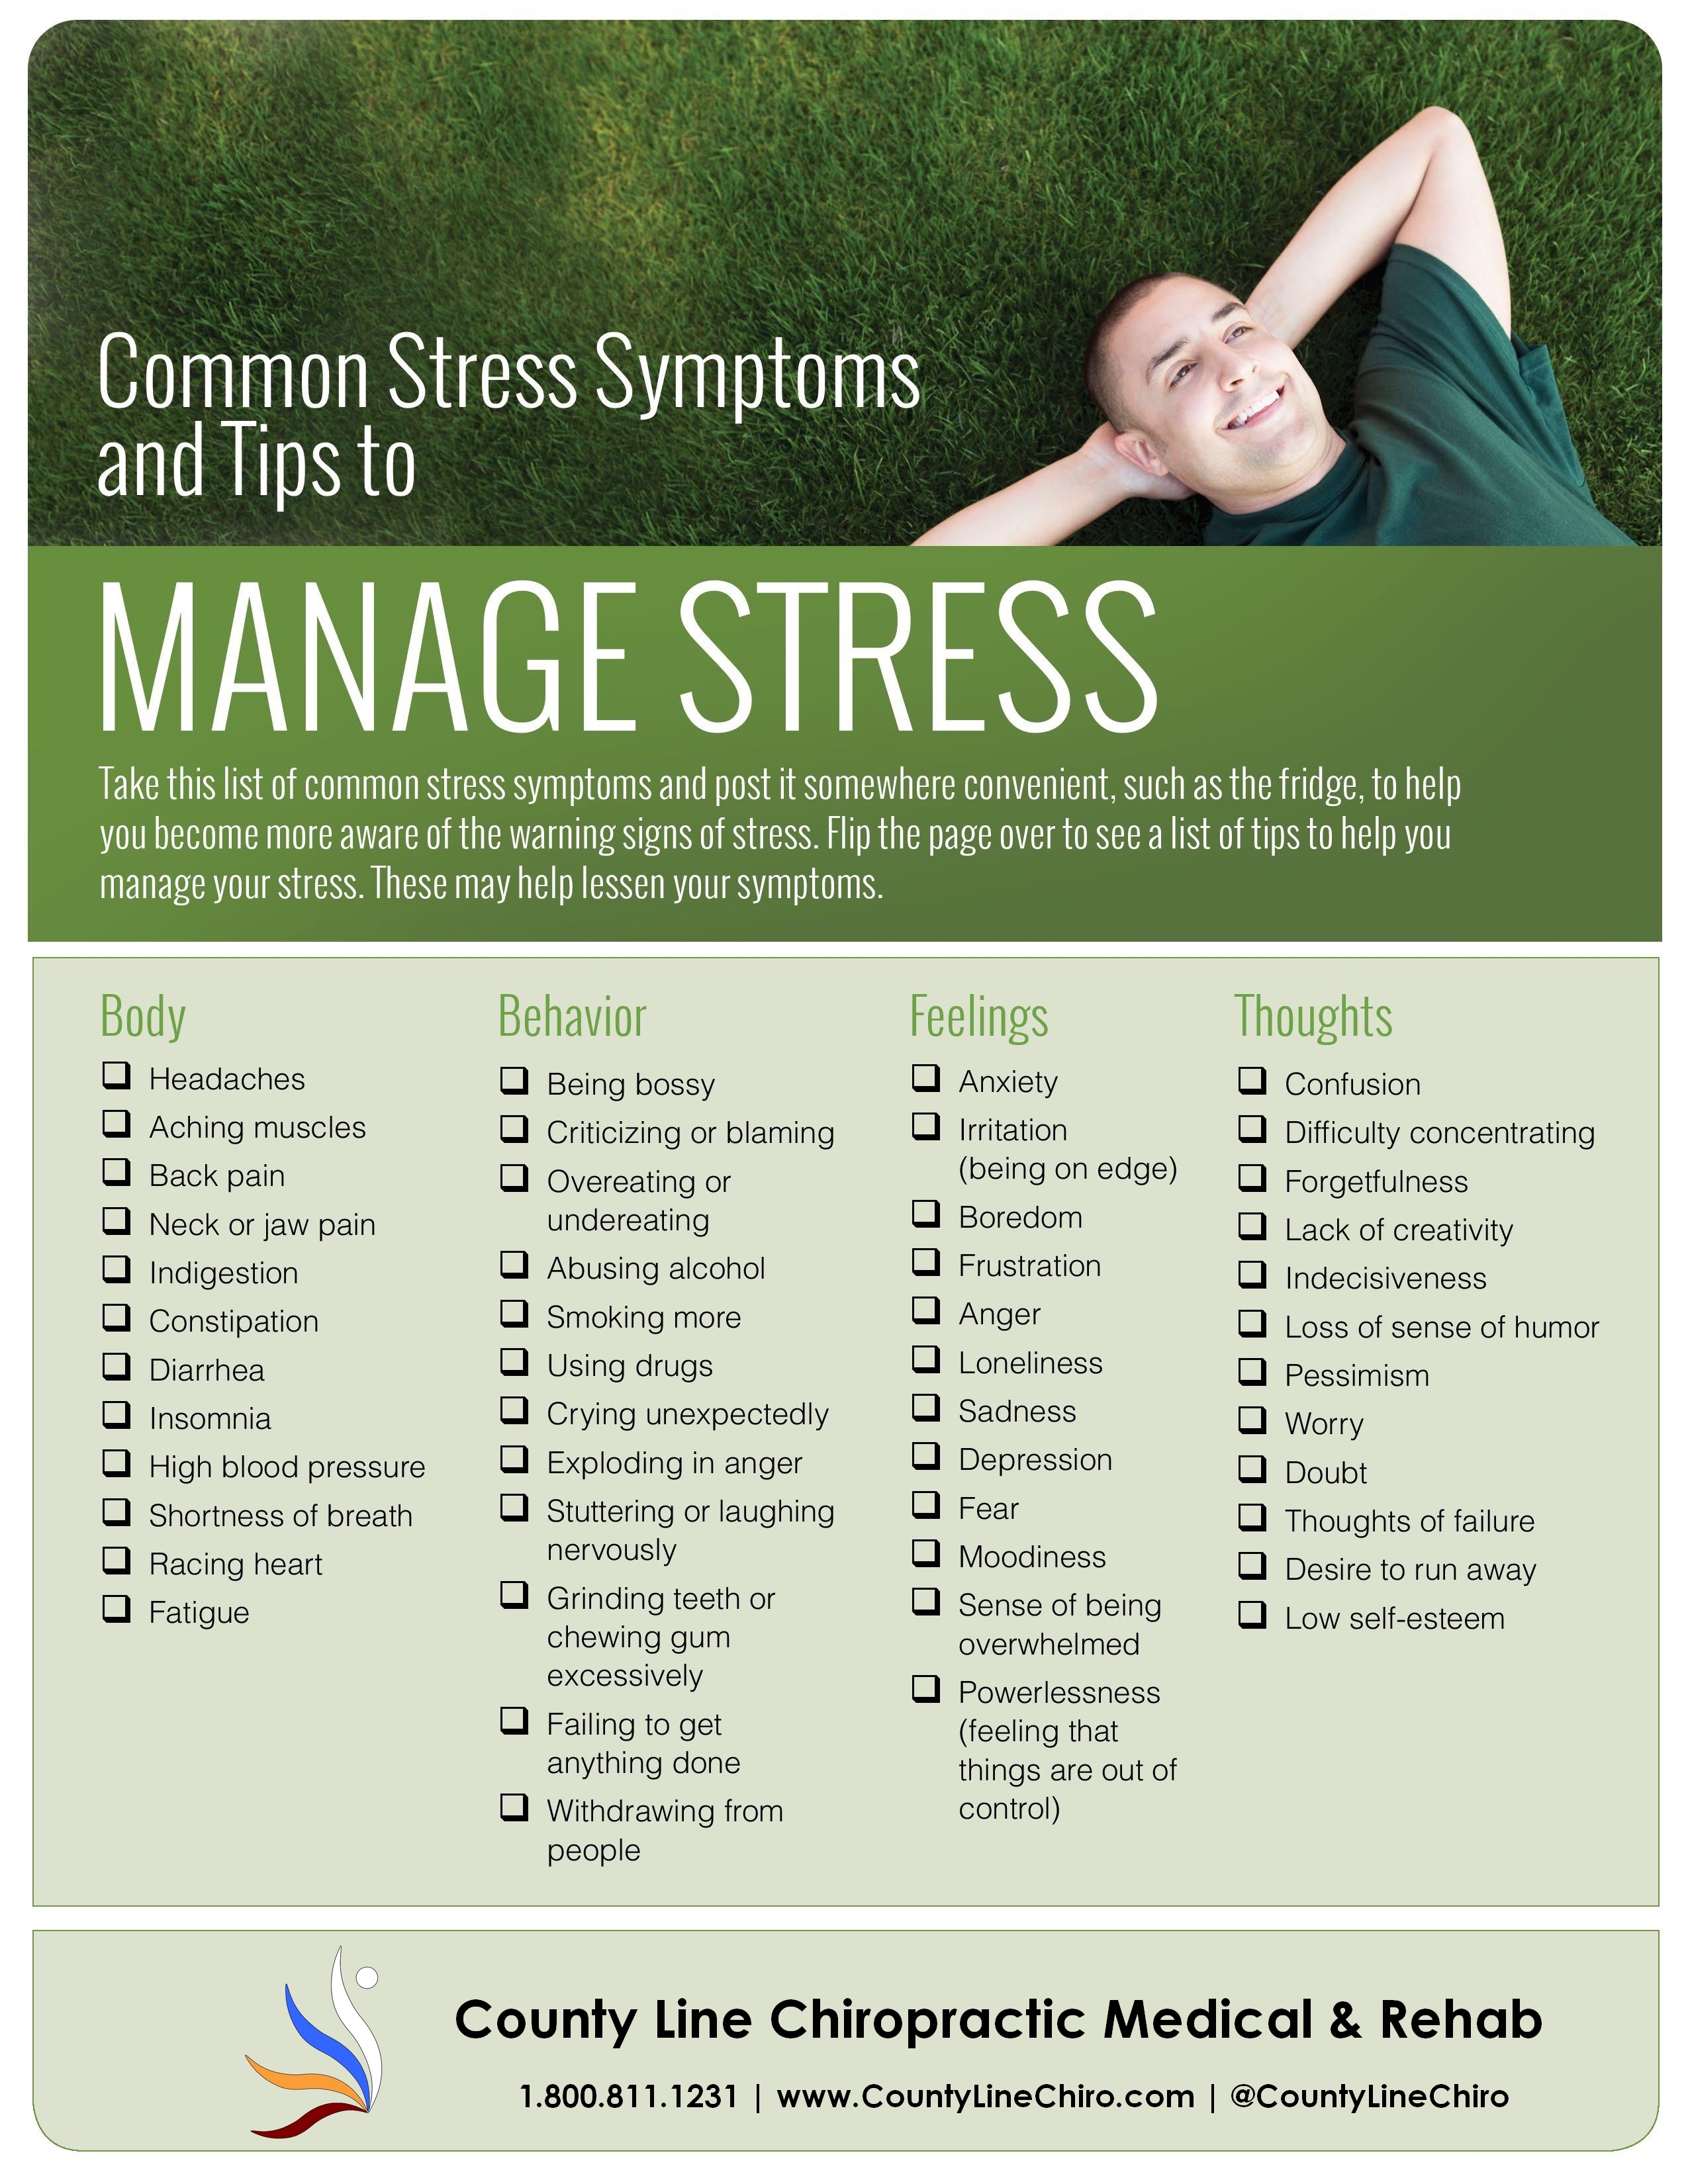 Common Stress Symptoms and Tips to Manage Stress